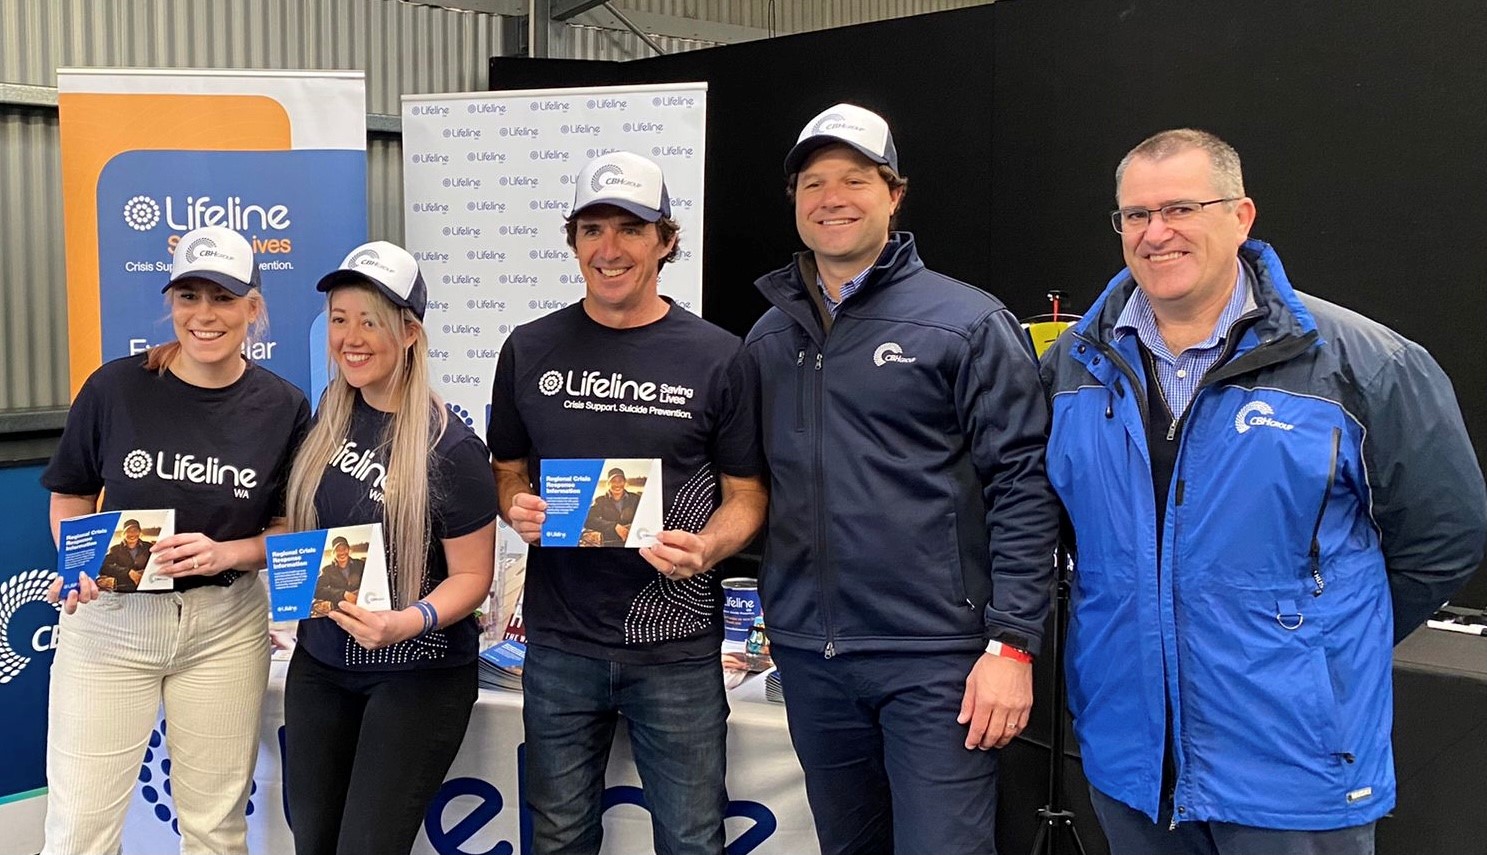 Lifeline volunteers and Brad Hogg and CBH staff holding crisis book at Newdegate Field Day 